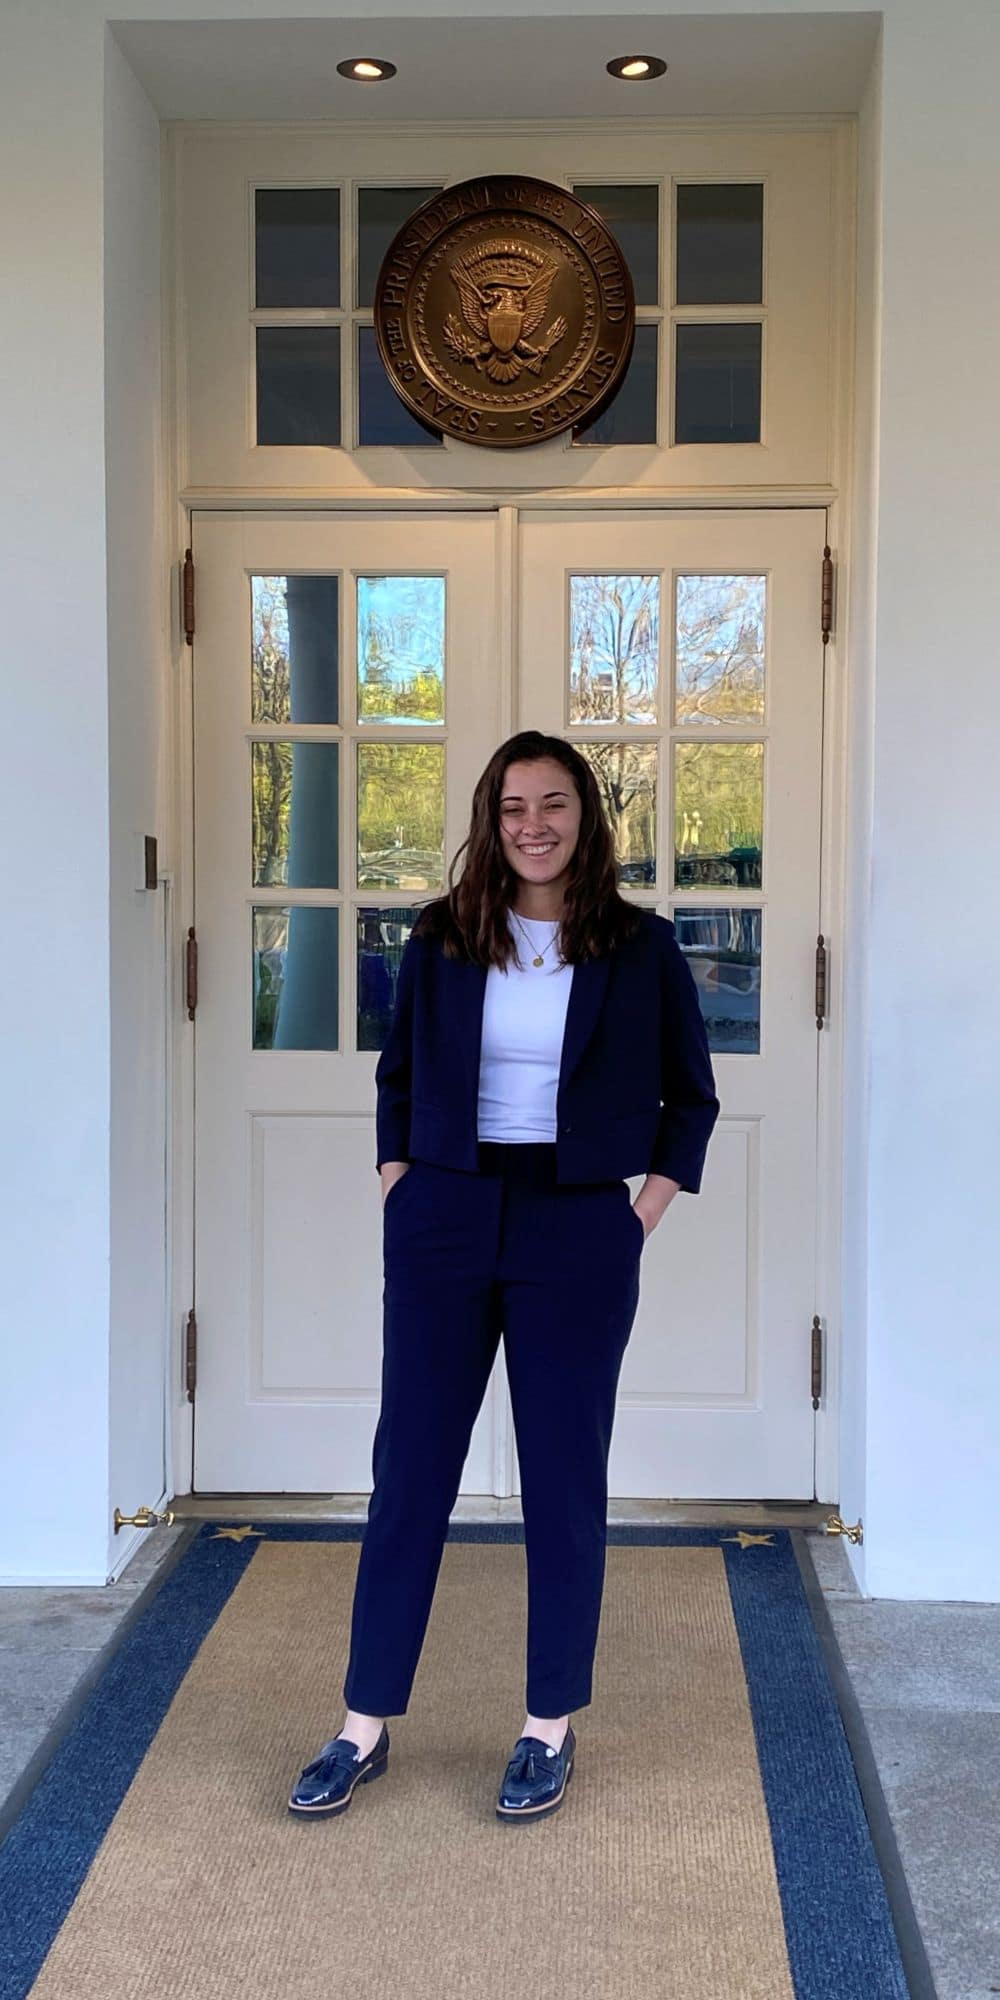 Cyber Intelligence and Security alumna Michaela Adams now works at MITRE in Washington, D.C. as a senior security analyst focusing on threat hunting and detection engineering.